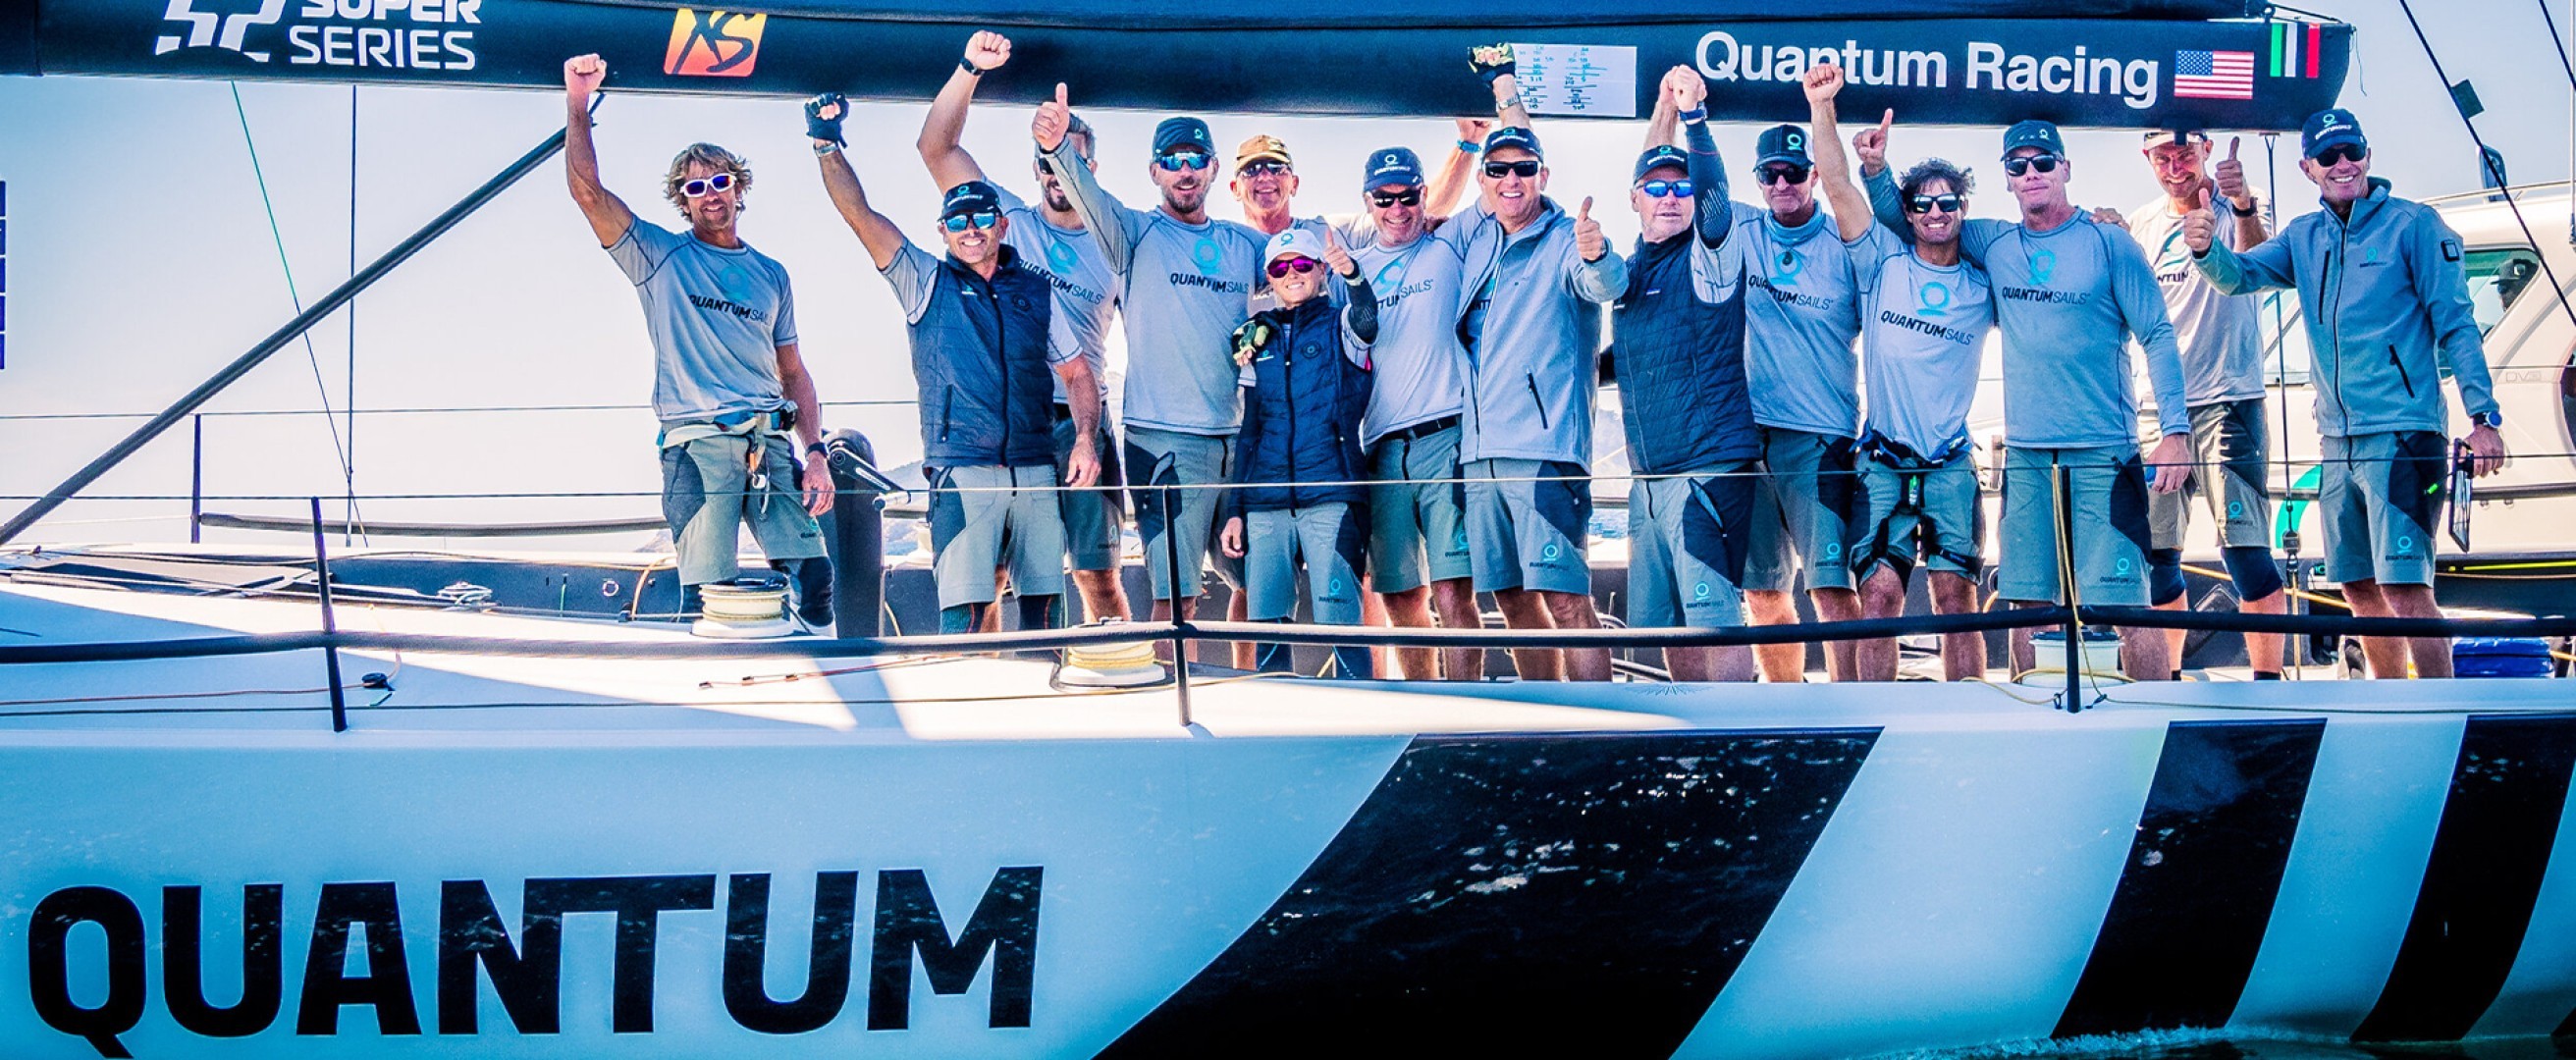 Quantum Racing Take 2022's 1st 52 Super Series title with Baiona win